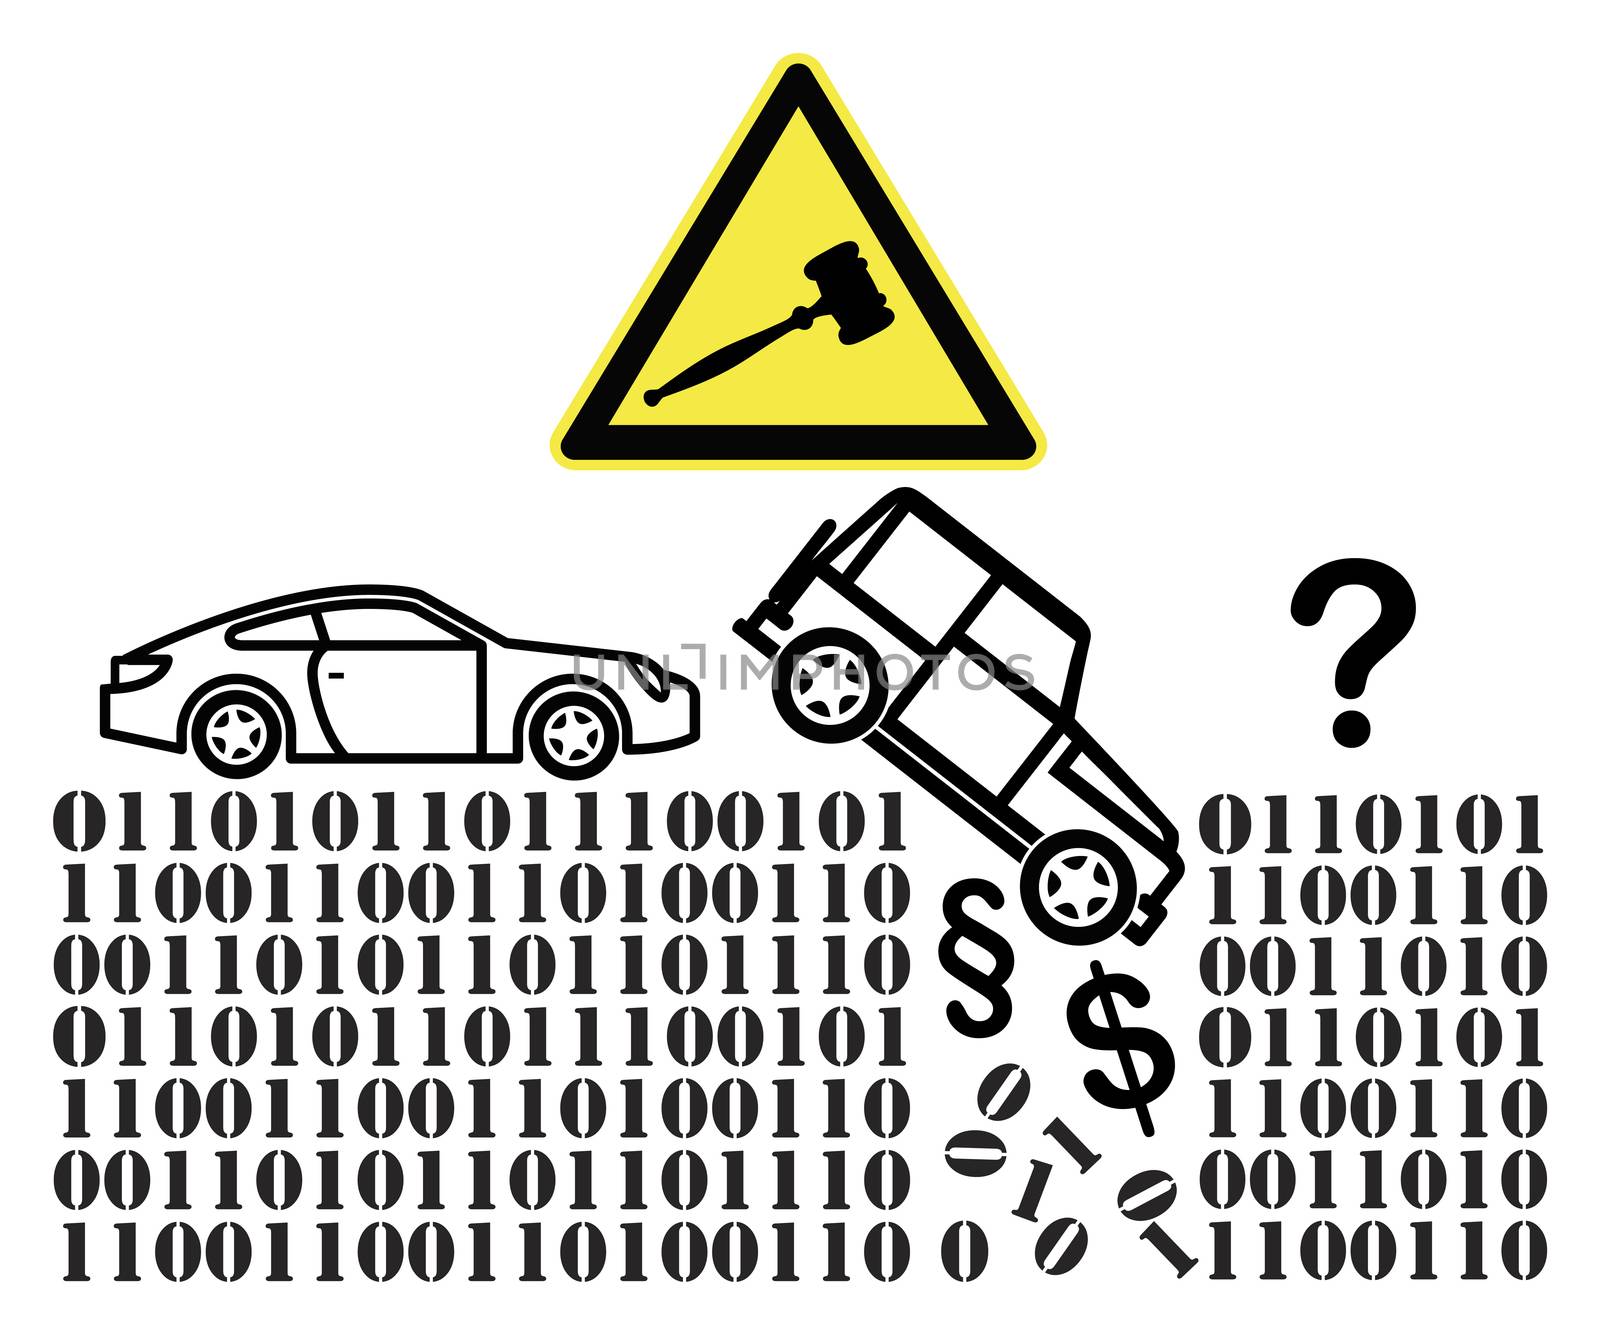 Self driving vehicles rising many question concerning car insurance and product liability